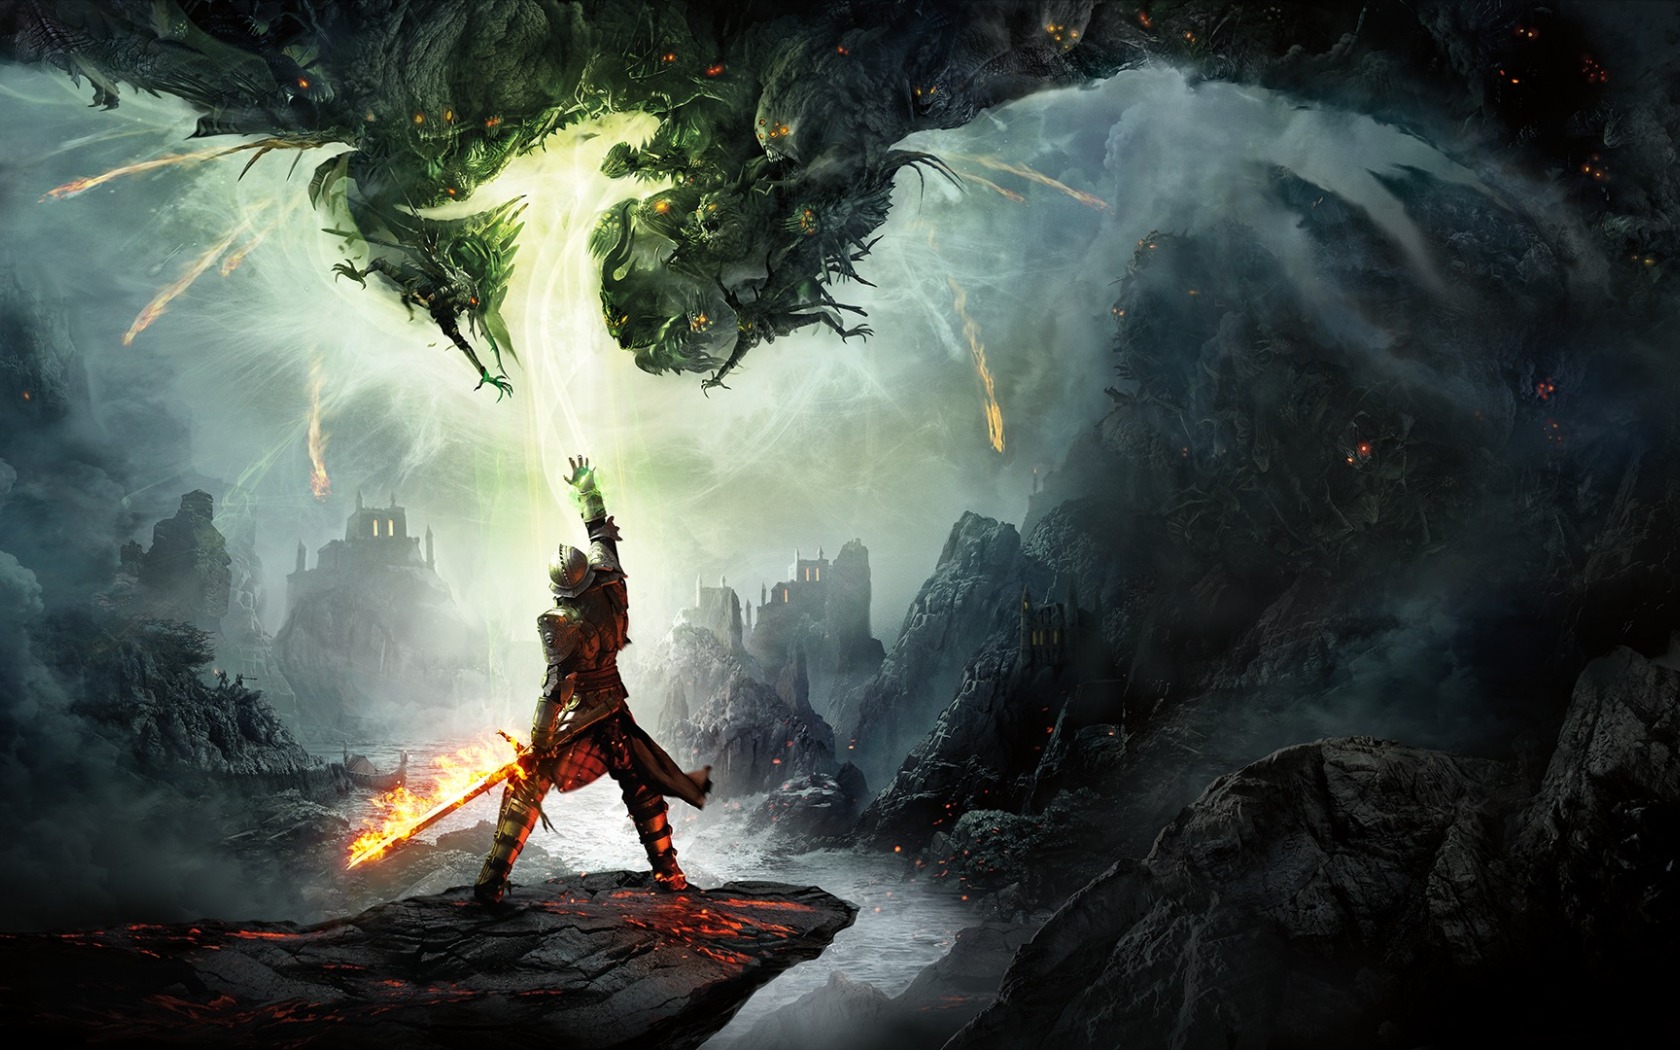 Dragon Age Inquisition Hd wallpaper by lise RevelWallpapersnet 1680x1050